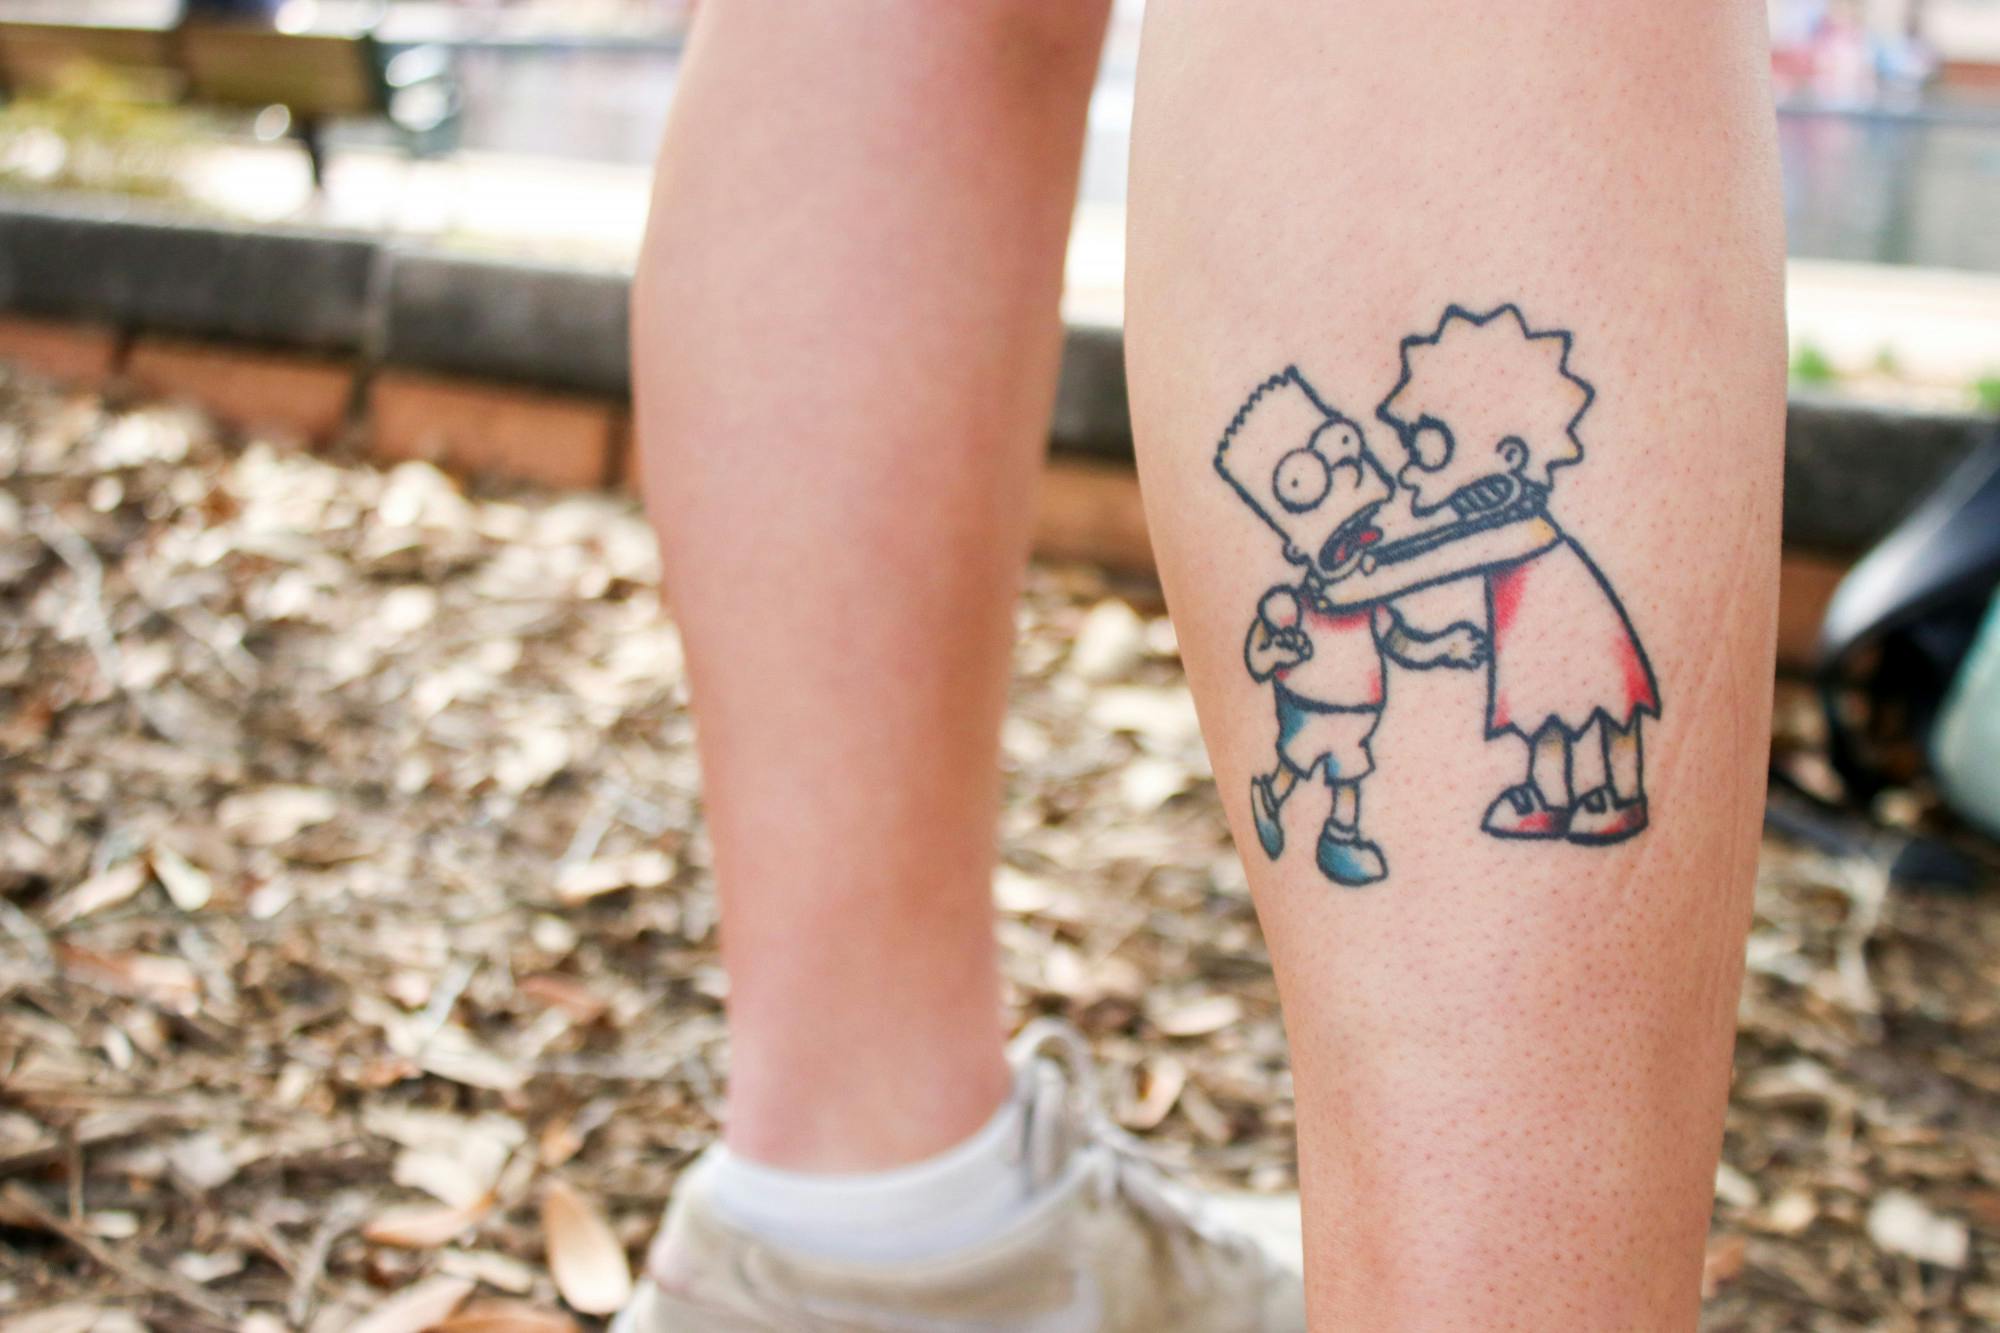 This Simpsons tattoo looks minimalist  but is actually an insane optical  illusion